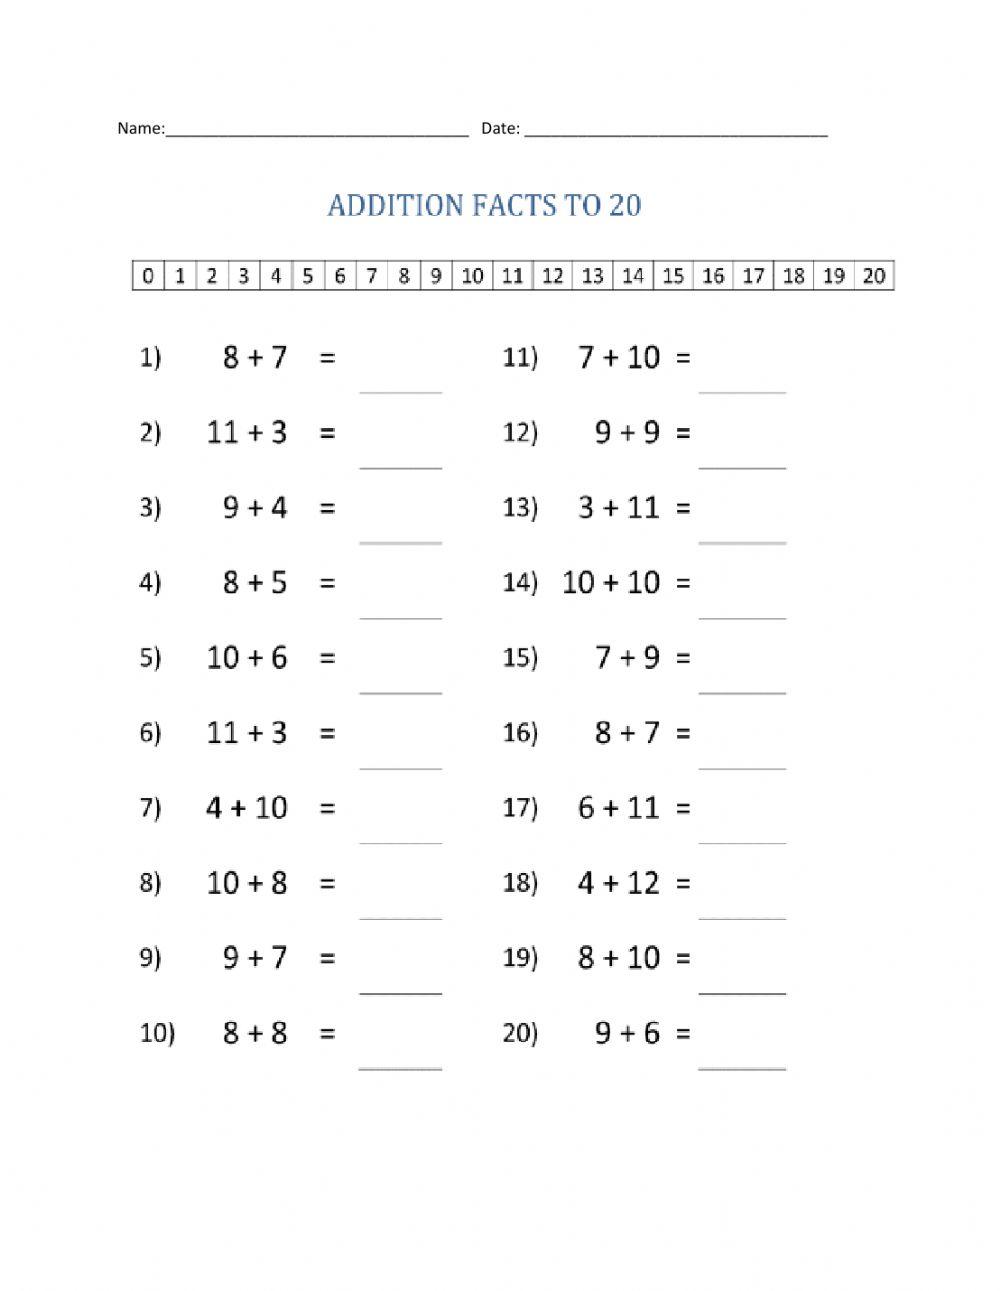 Addition facts to 20